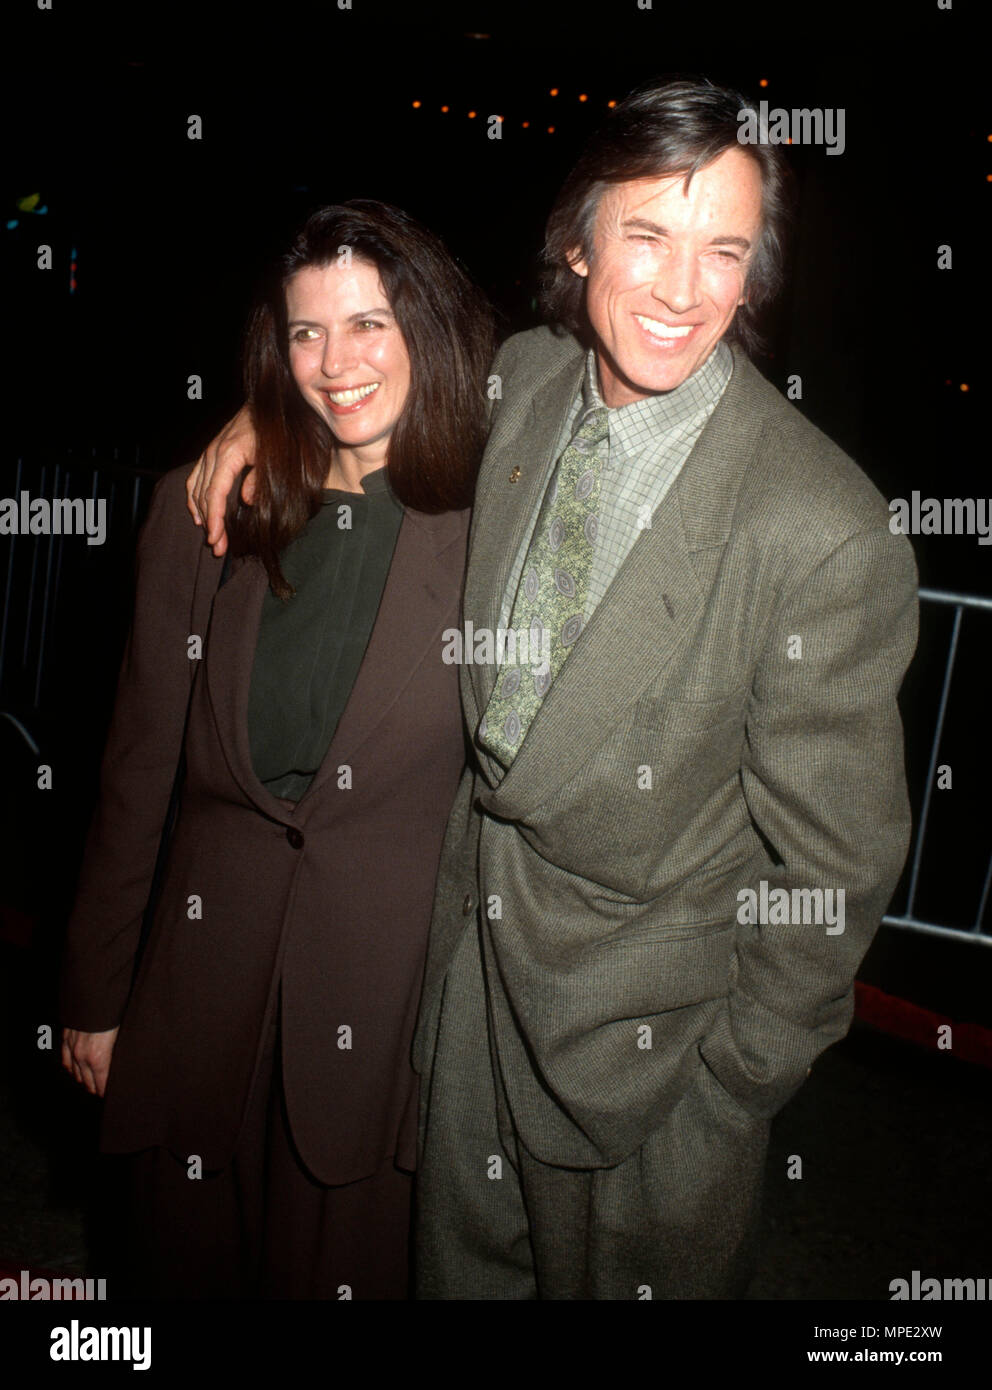 CENTURY CITY, CA - FEBRUARY 2: (L-R) Carol Schwartz and actor Scott Glenn attend 'The Silence of the Lambs' Century City Premiere on February 2, 1991 at Cineplex Odeon Century City Cinemas in Century City, California. Photo by Barry King/Alamy Stock Photo Stock Photo